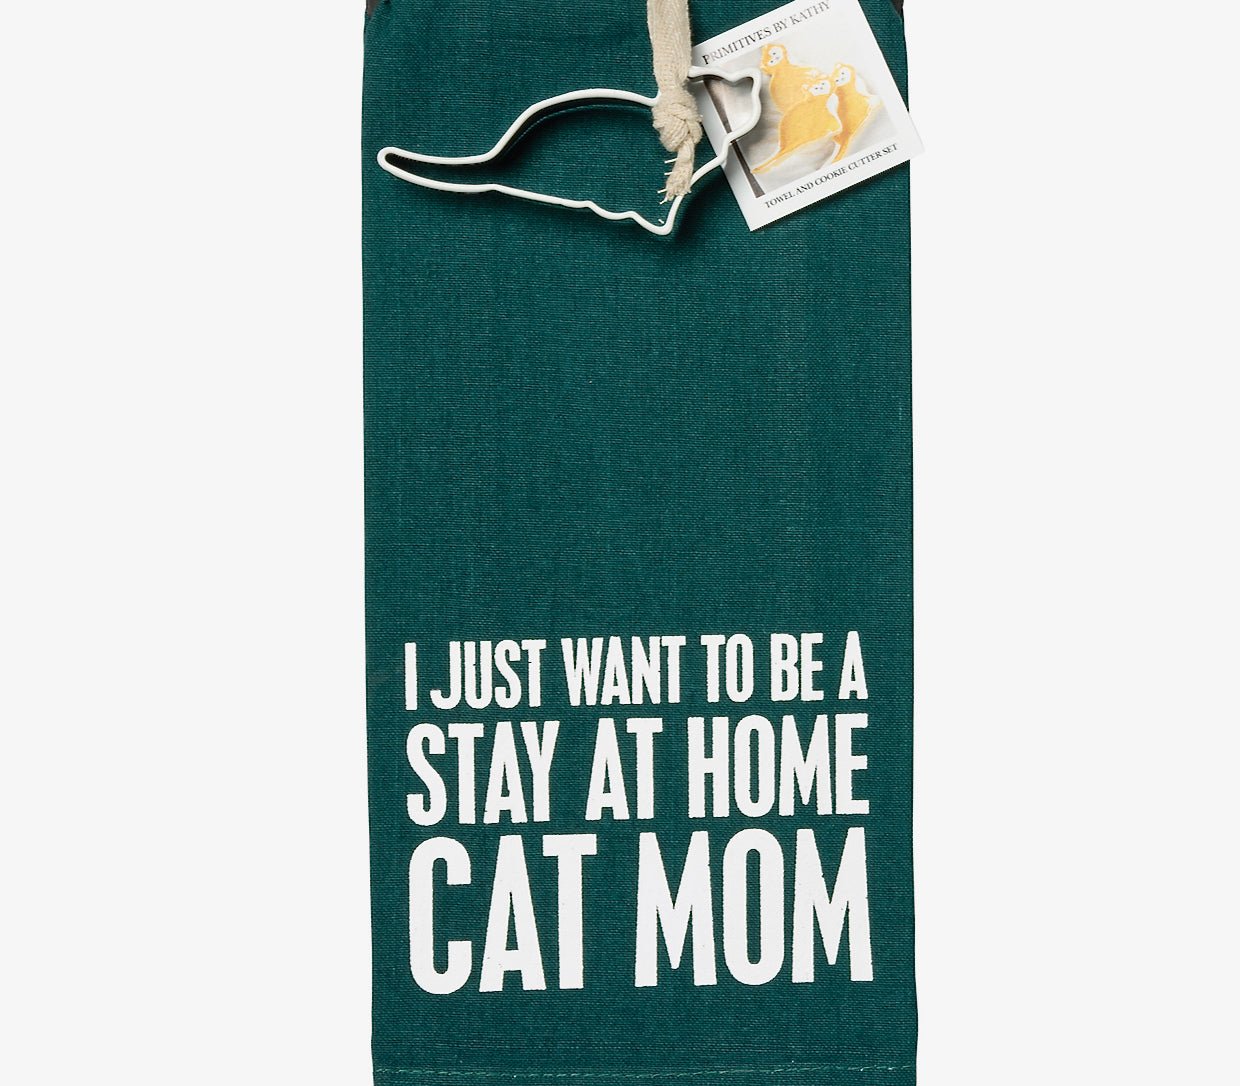 Stay At Home Cat Mom Tea towel w Cat Cookie Cutter - Marmalade Mercantile